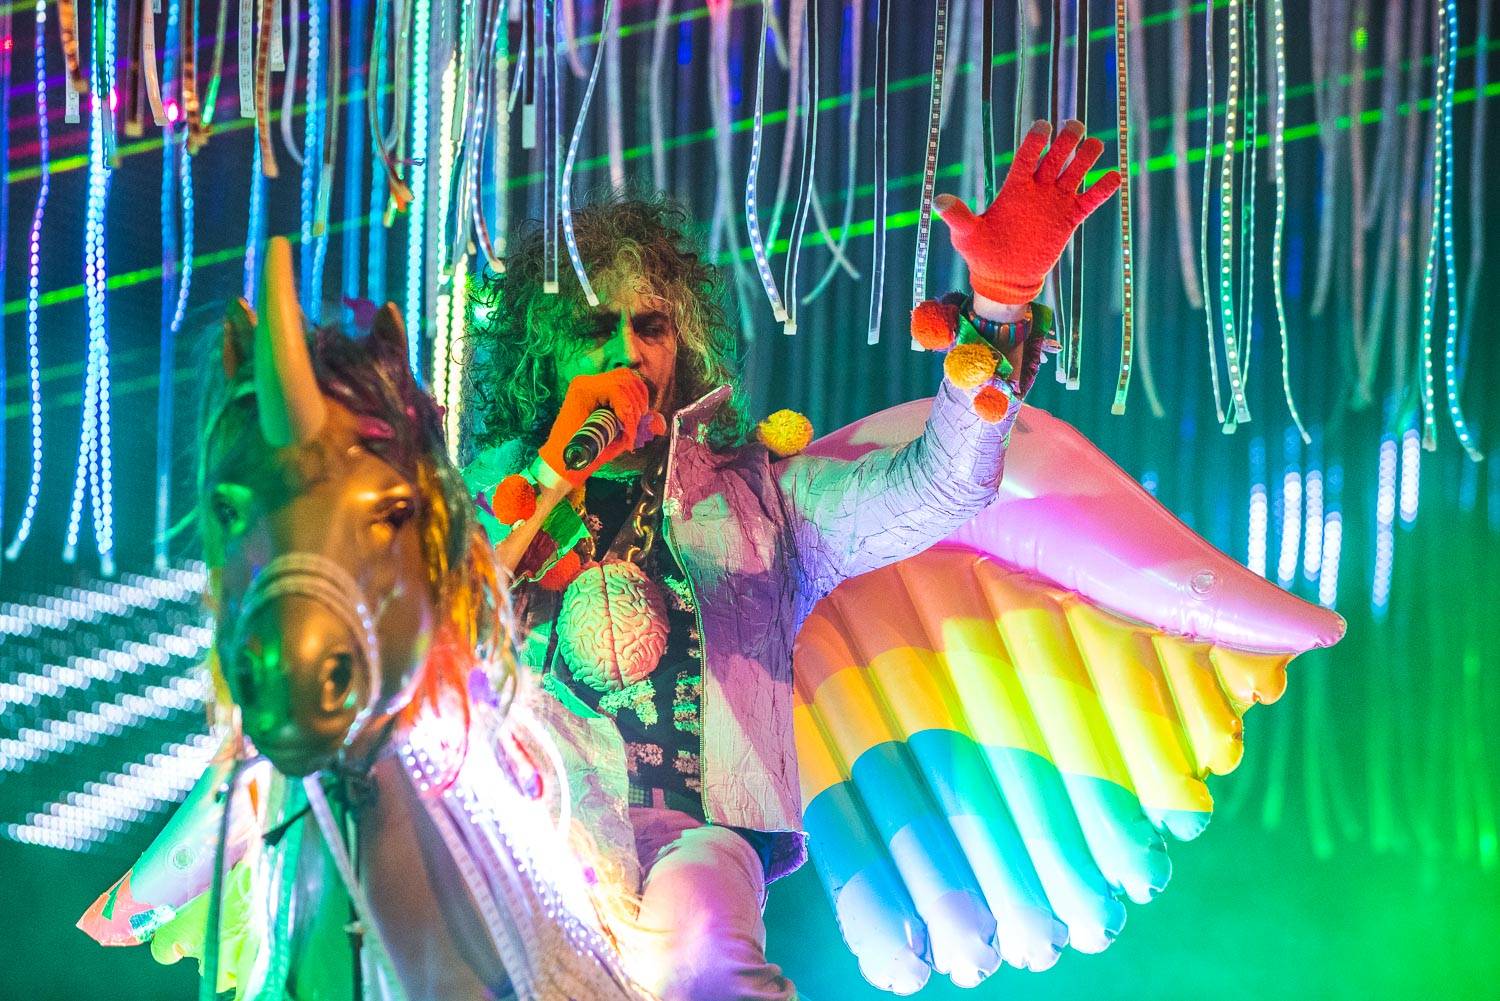 Flaming Lips at the Queen Elizabeth Theatre, Vancouver, May 15 2017. Pavel Boiko photo.